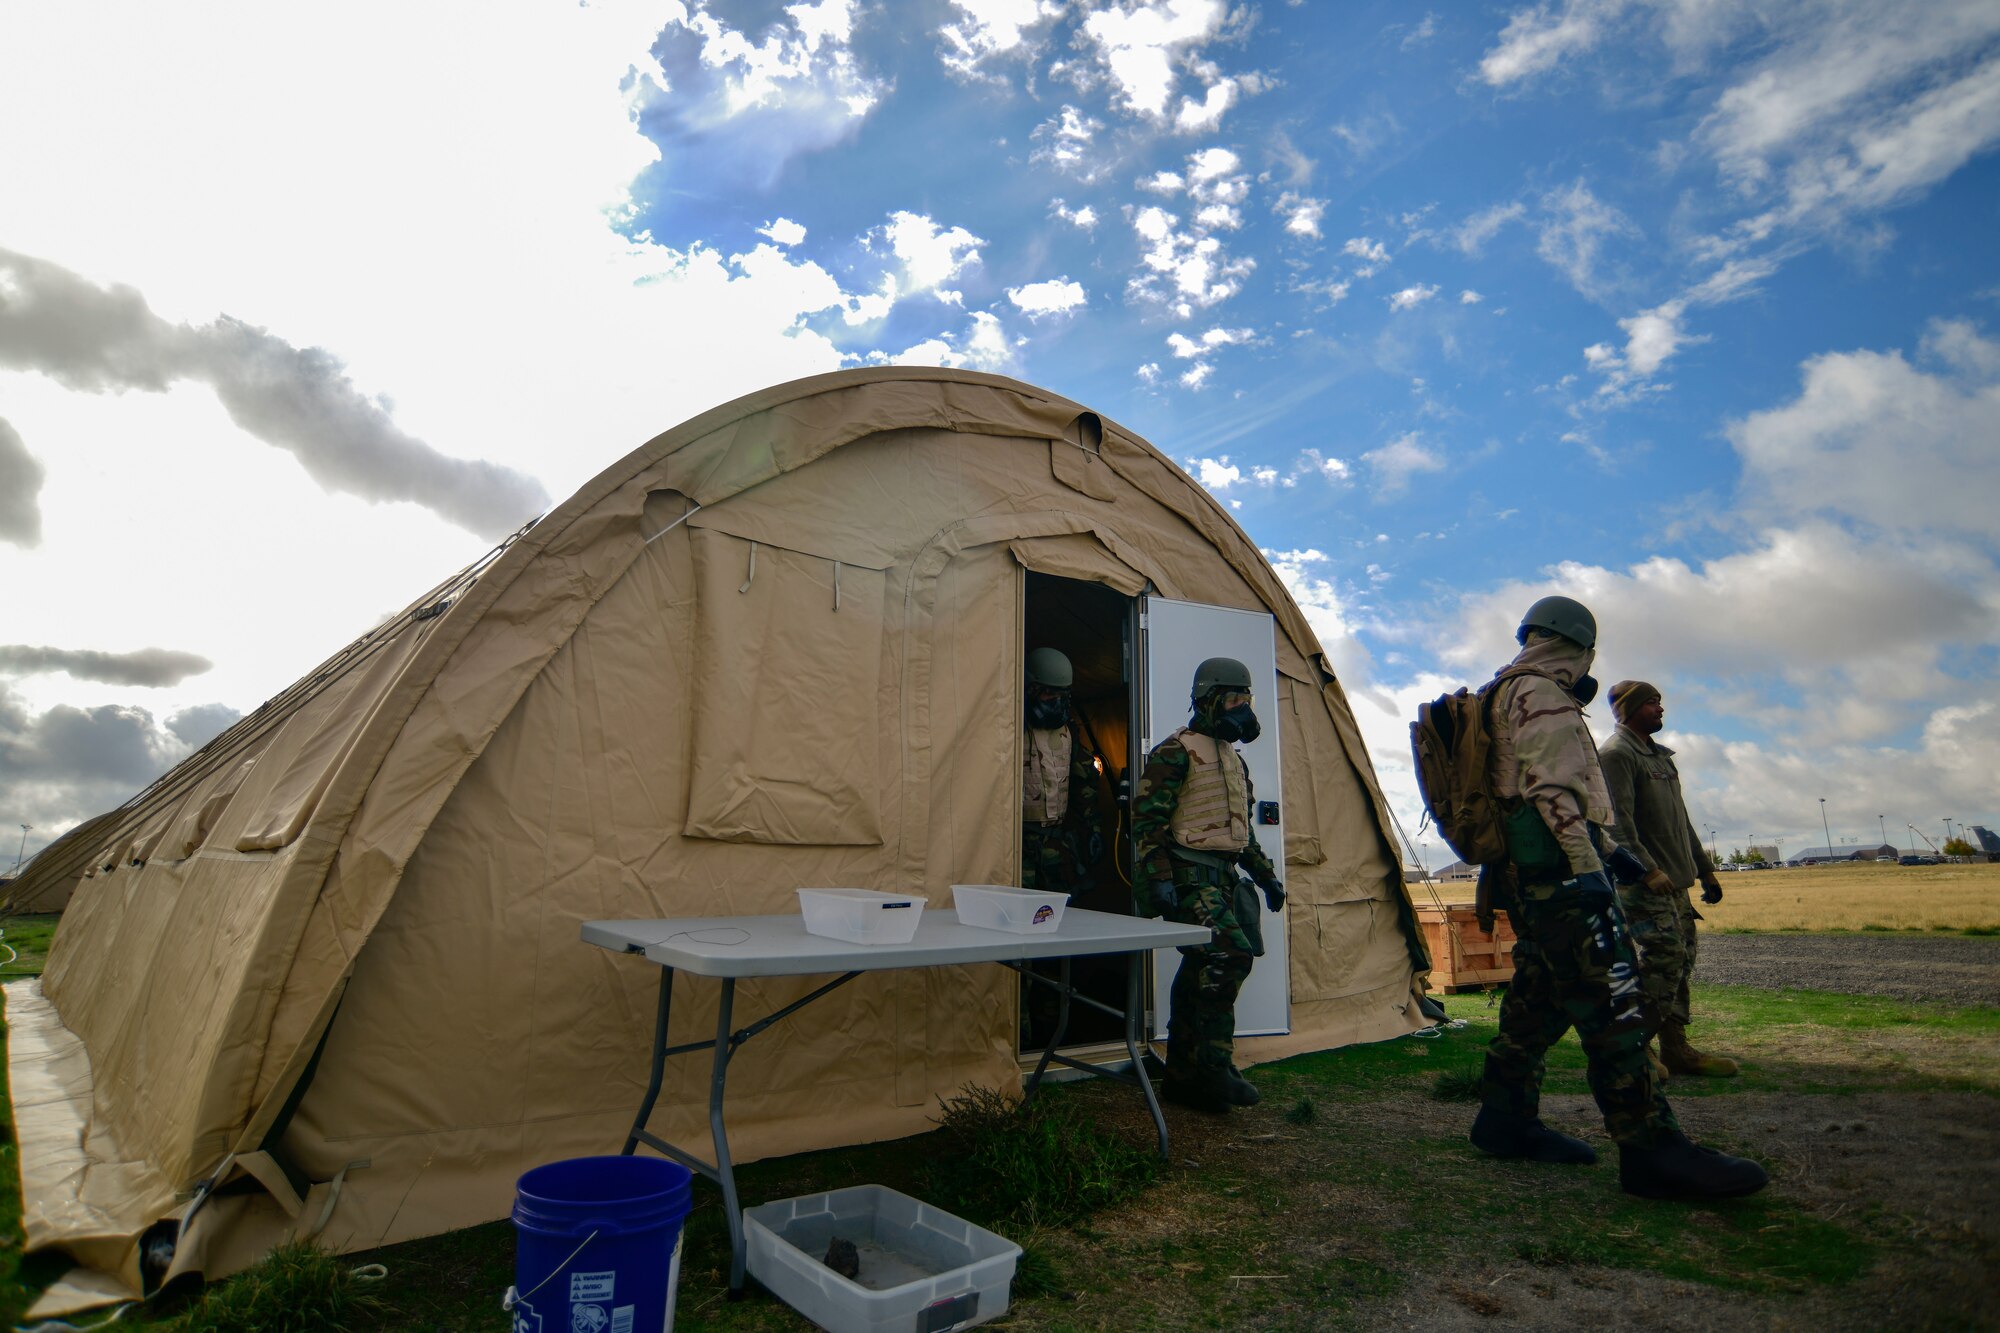 U.S. Air Force Airmen from Team Fairchild exit a shelter during a large readiness exercise at Fairchild Air Force Base, Washington, Oct. 6, 2021. The training required Airmen to conduct a post-attack reconnaissance sweep during the exercise. (U.S. Air Force photo by Senior Airman Ryan Gomez)